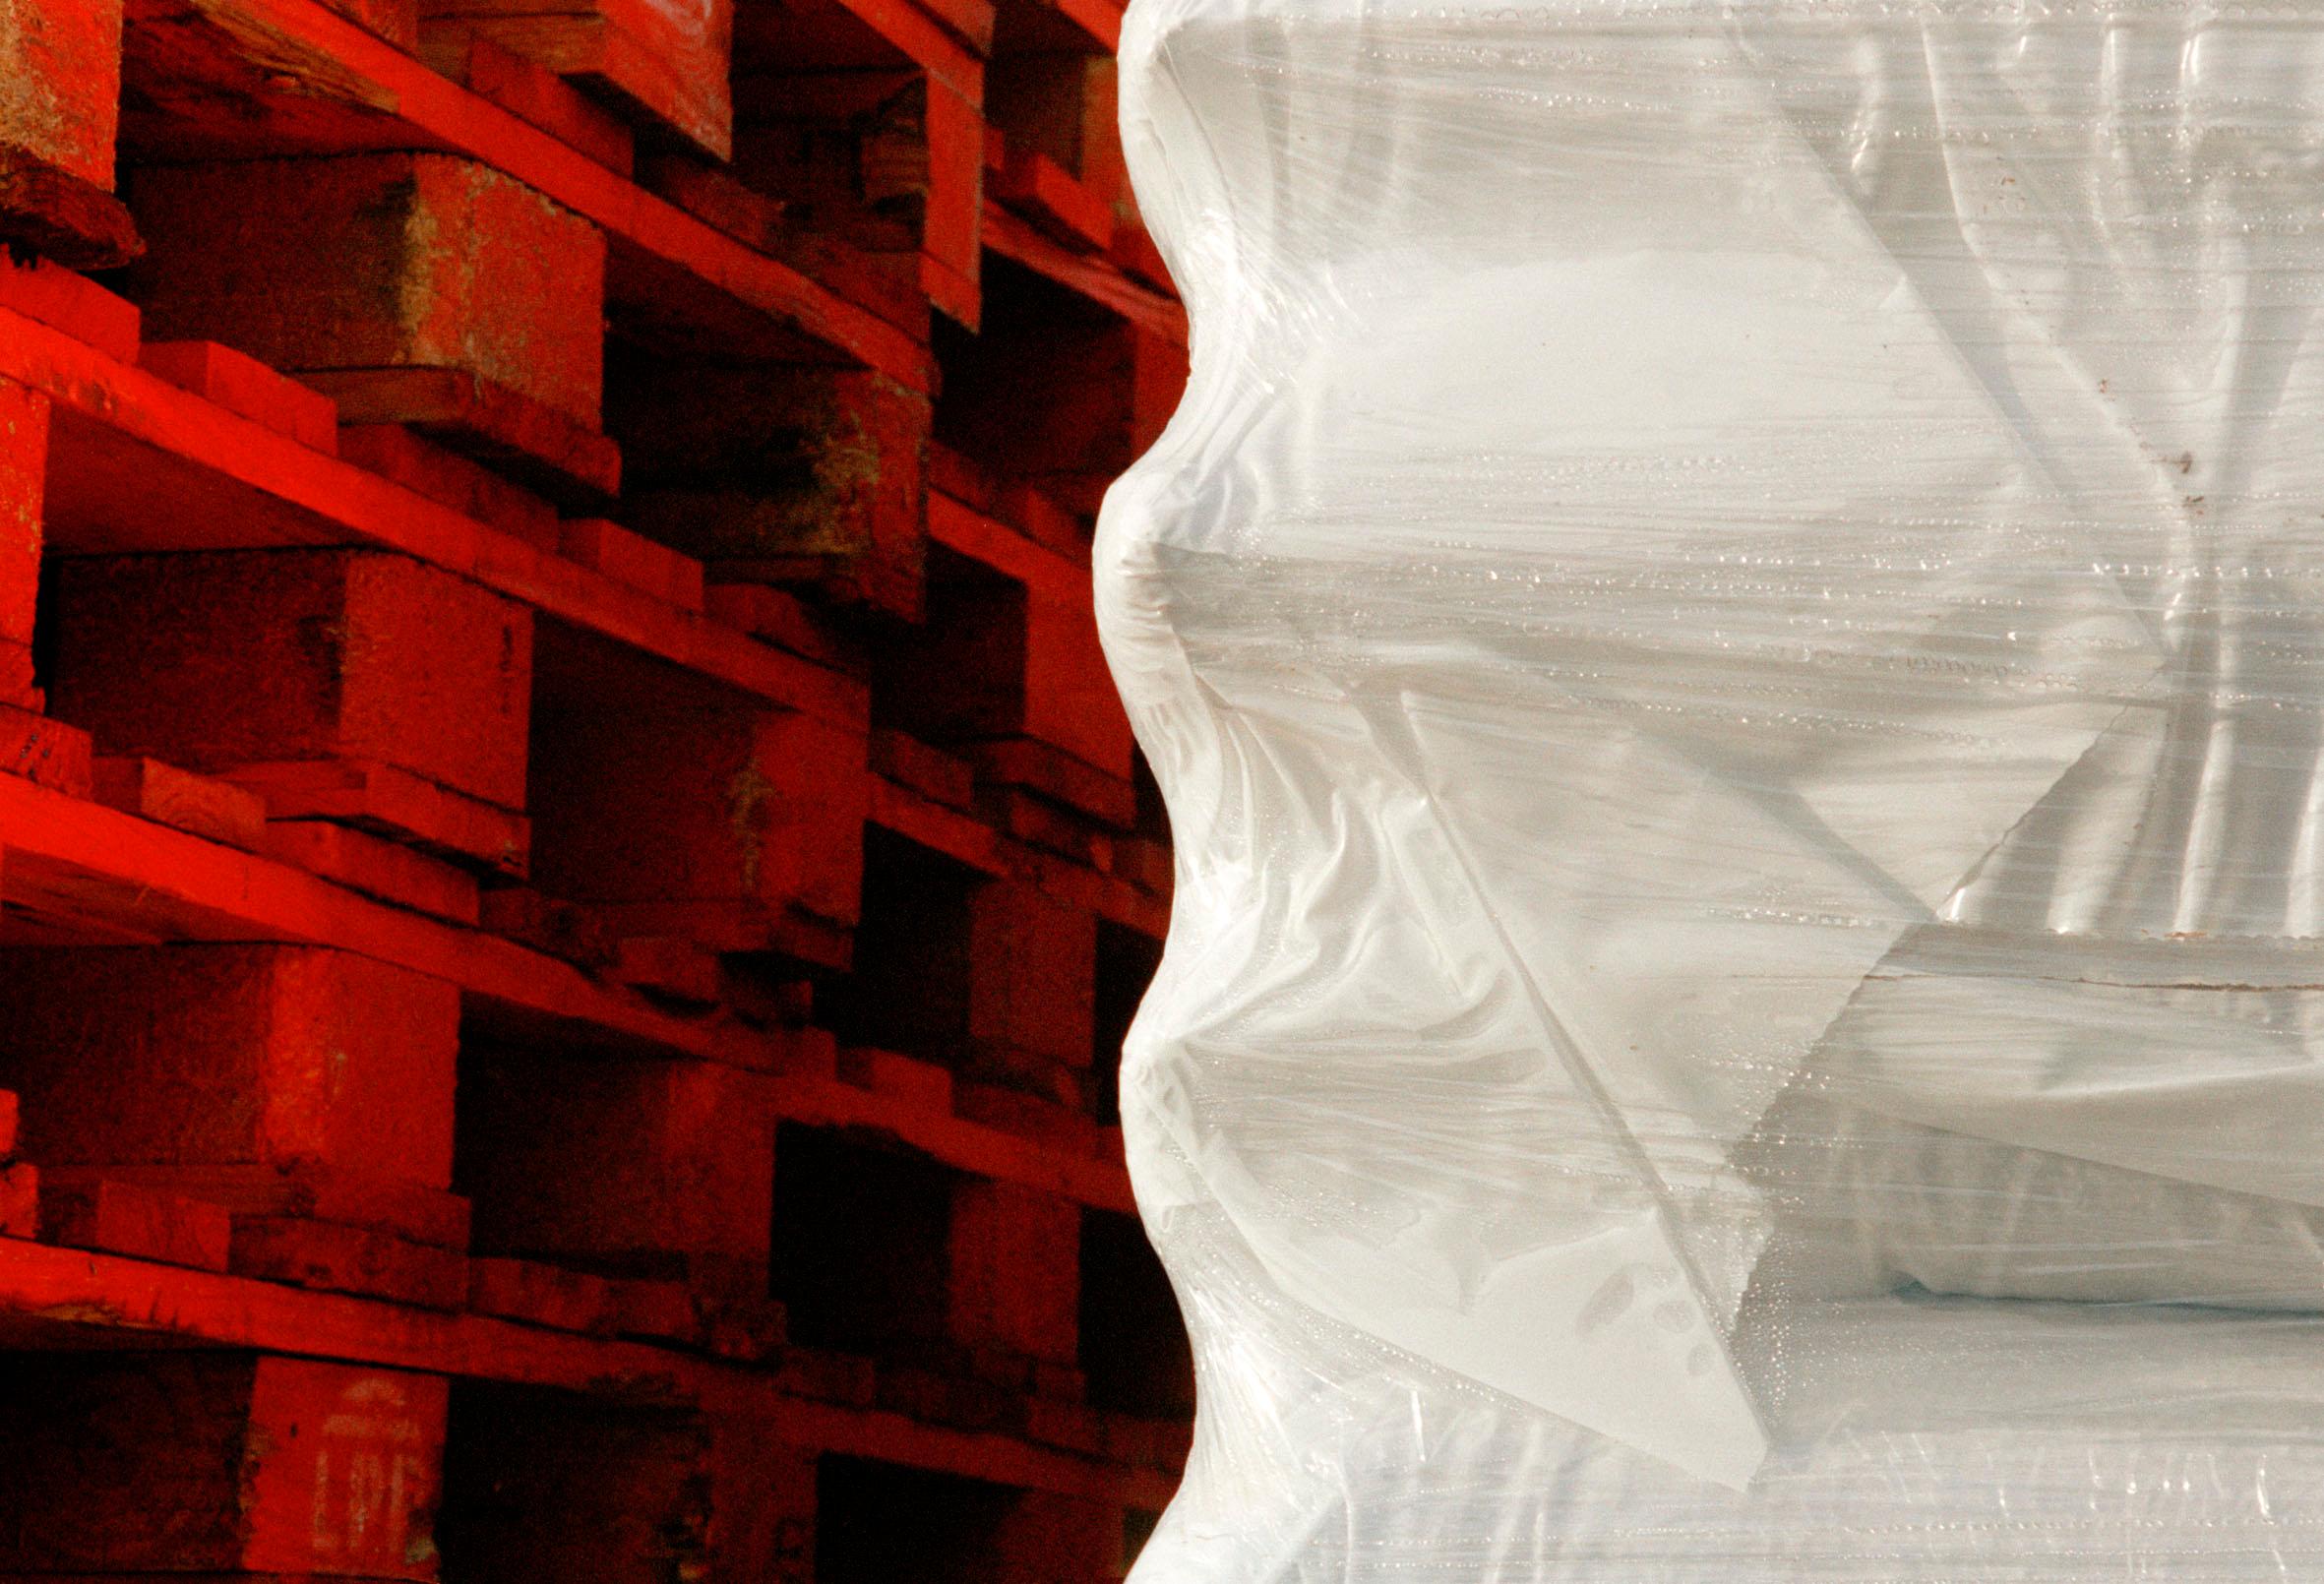 Iseult Labote Abstract Photograph - Urban Landscapes - Serie 1492 - N° I